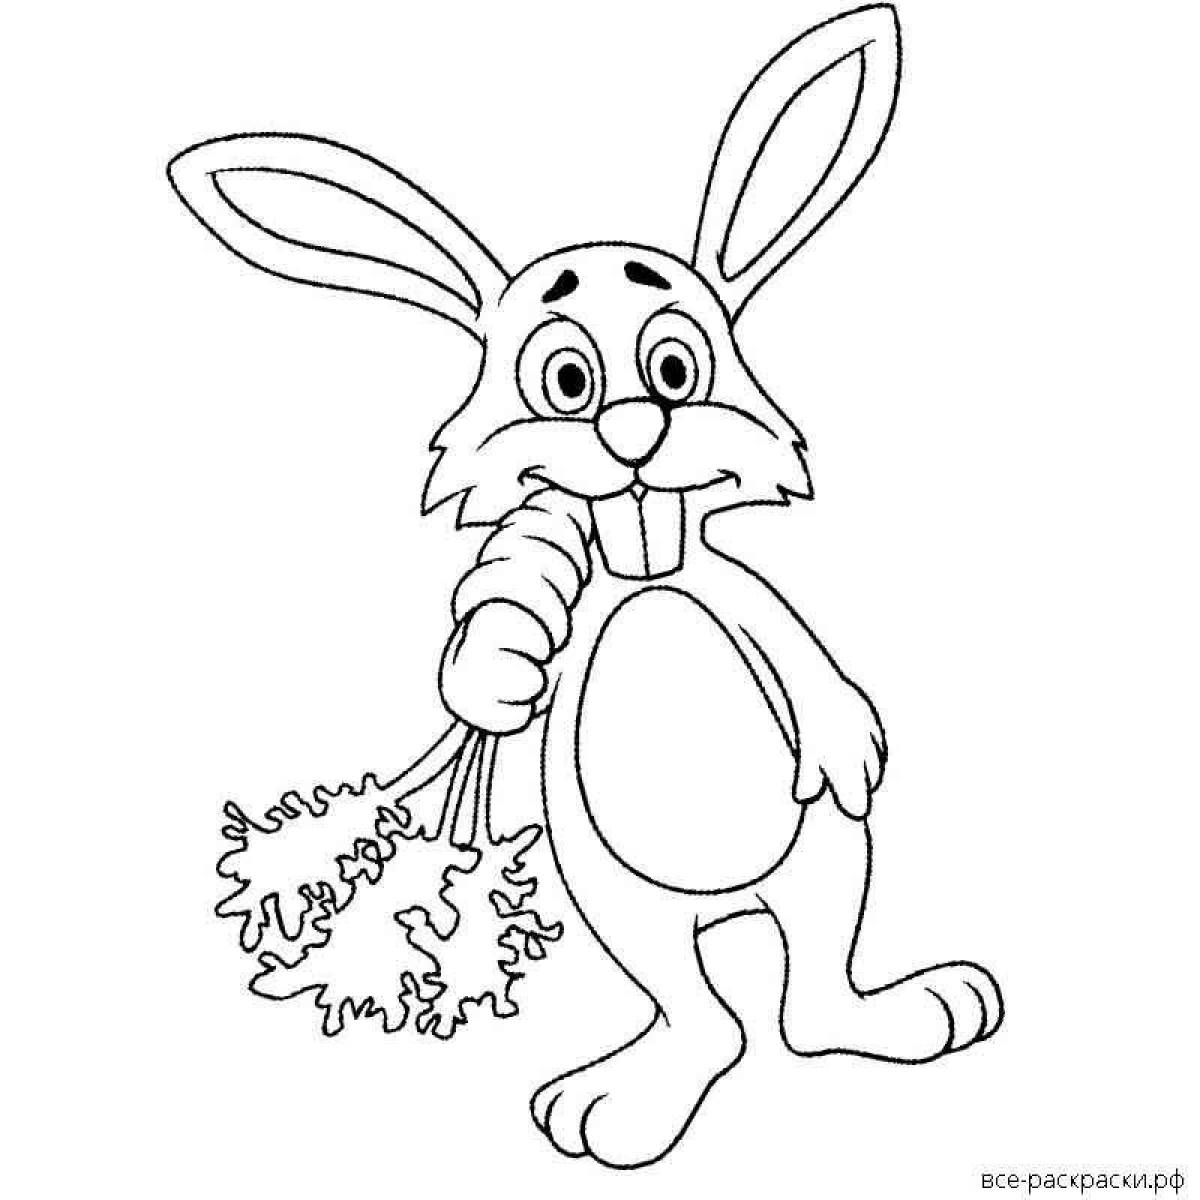 Fancy rabbit with carrot coloring book